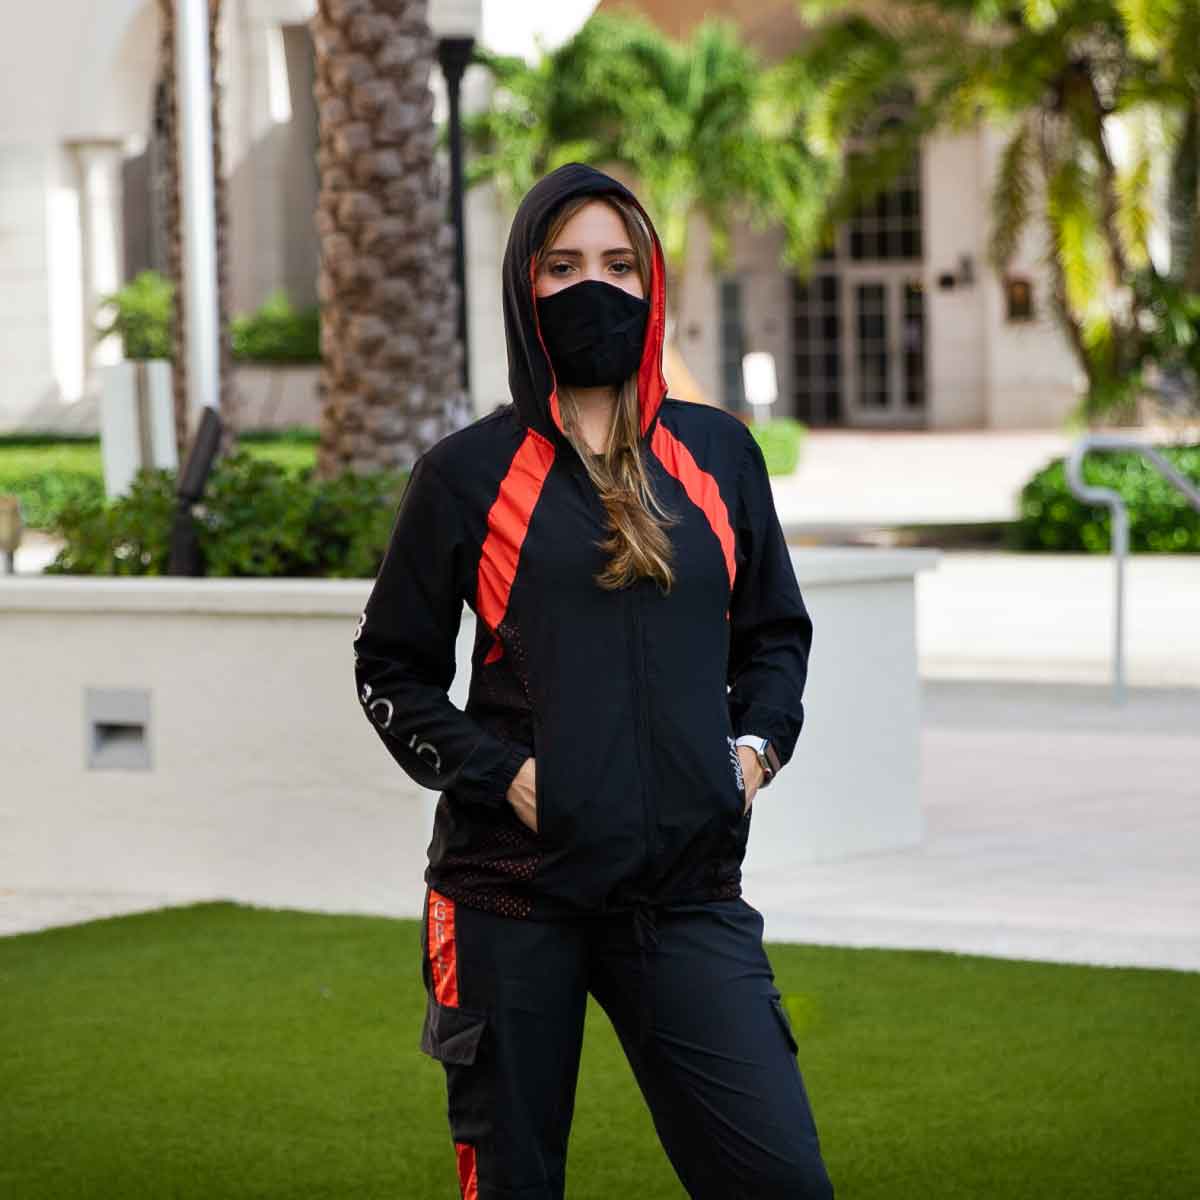 PROTECTIVE BLACK AND SEQUOIA WOMEN'S JACKET AND JOGGER SET - FACE MASK INCLUDED